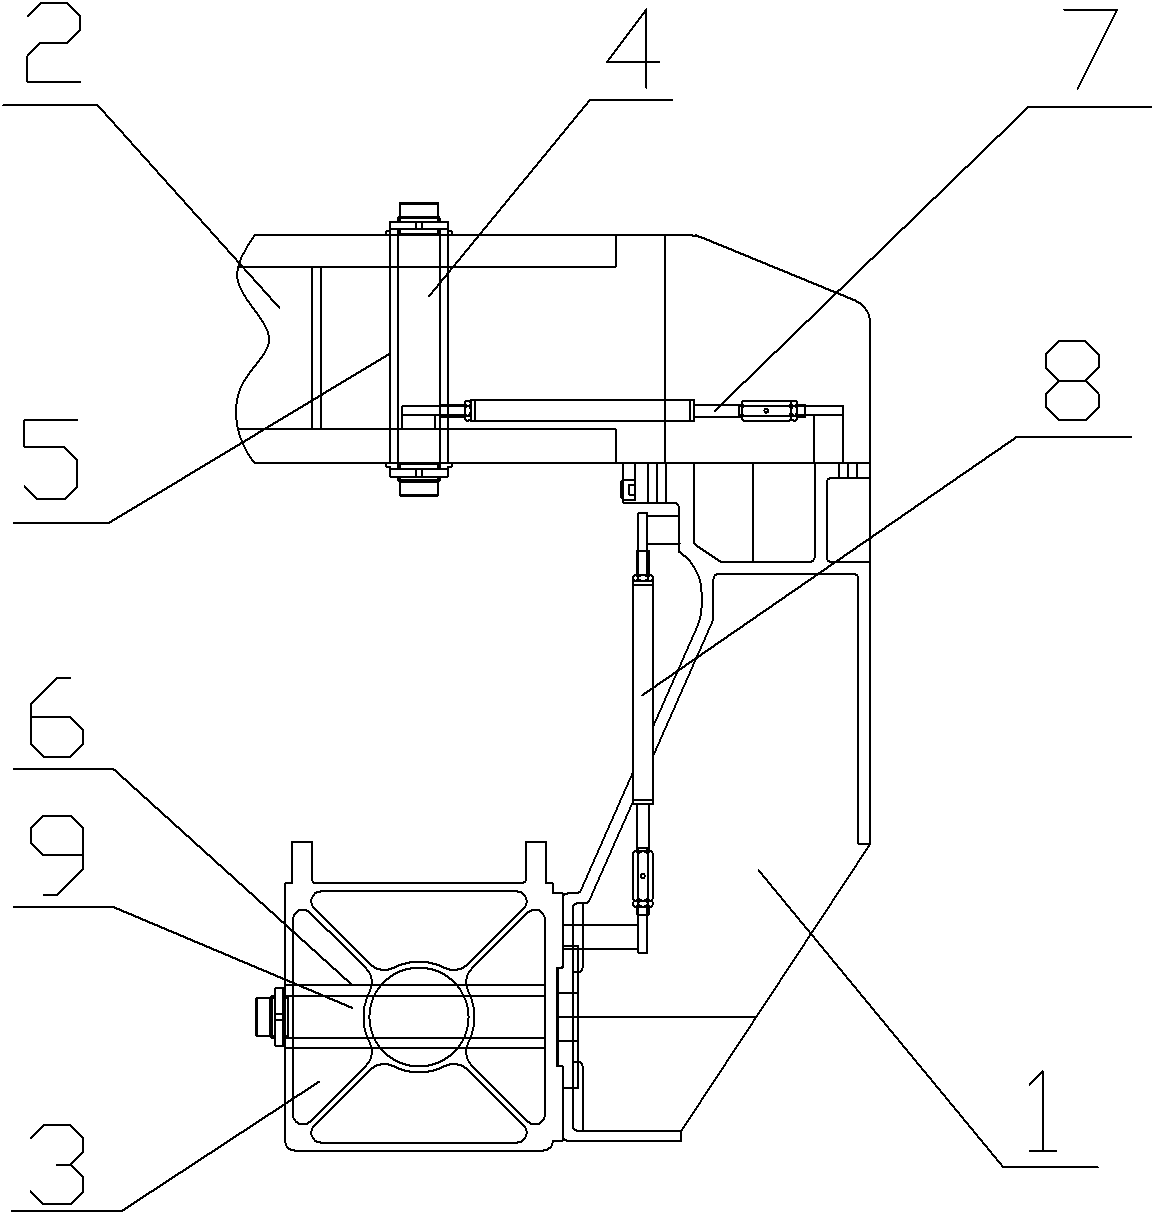 Movable cantilever structure of magnetic suspension train